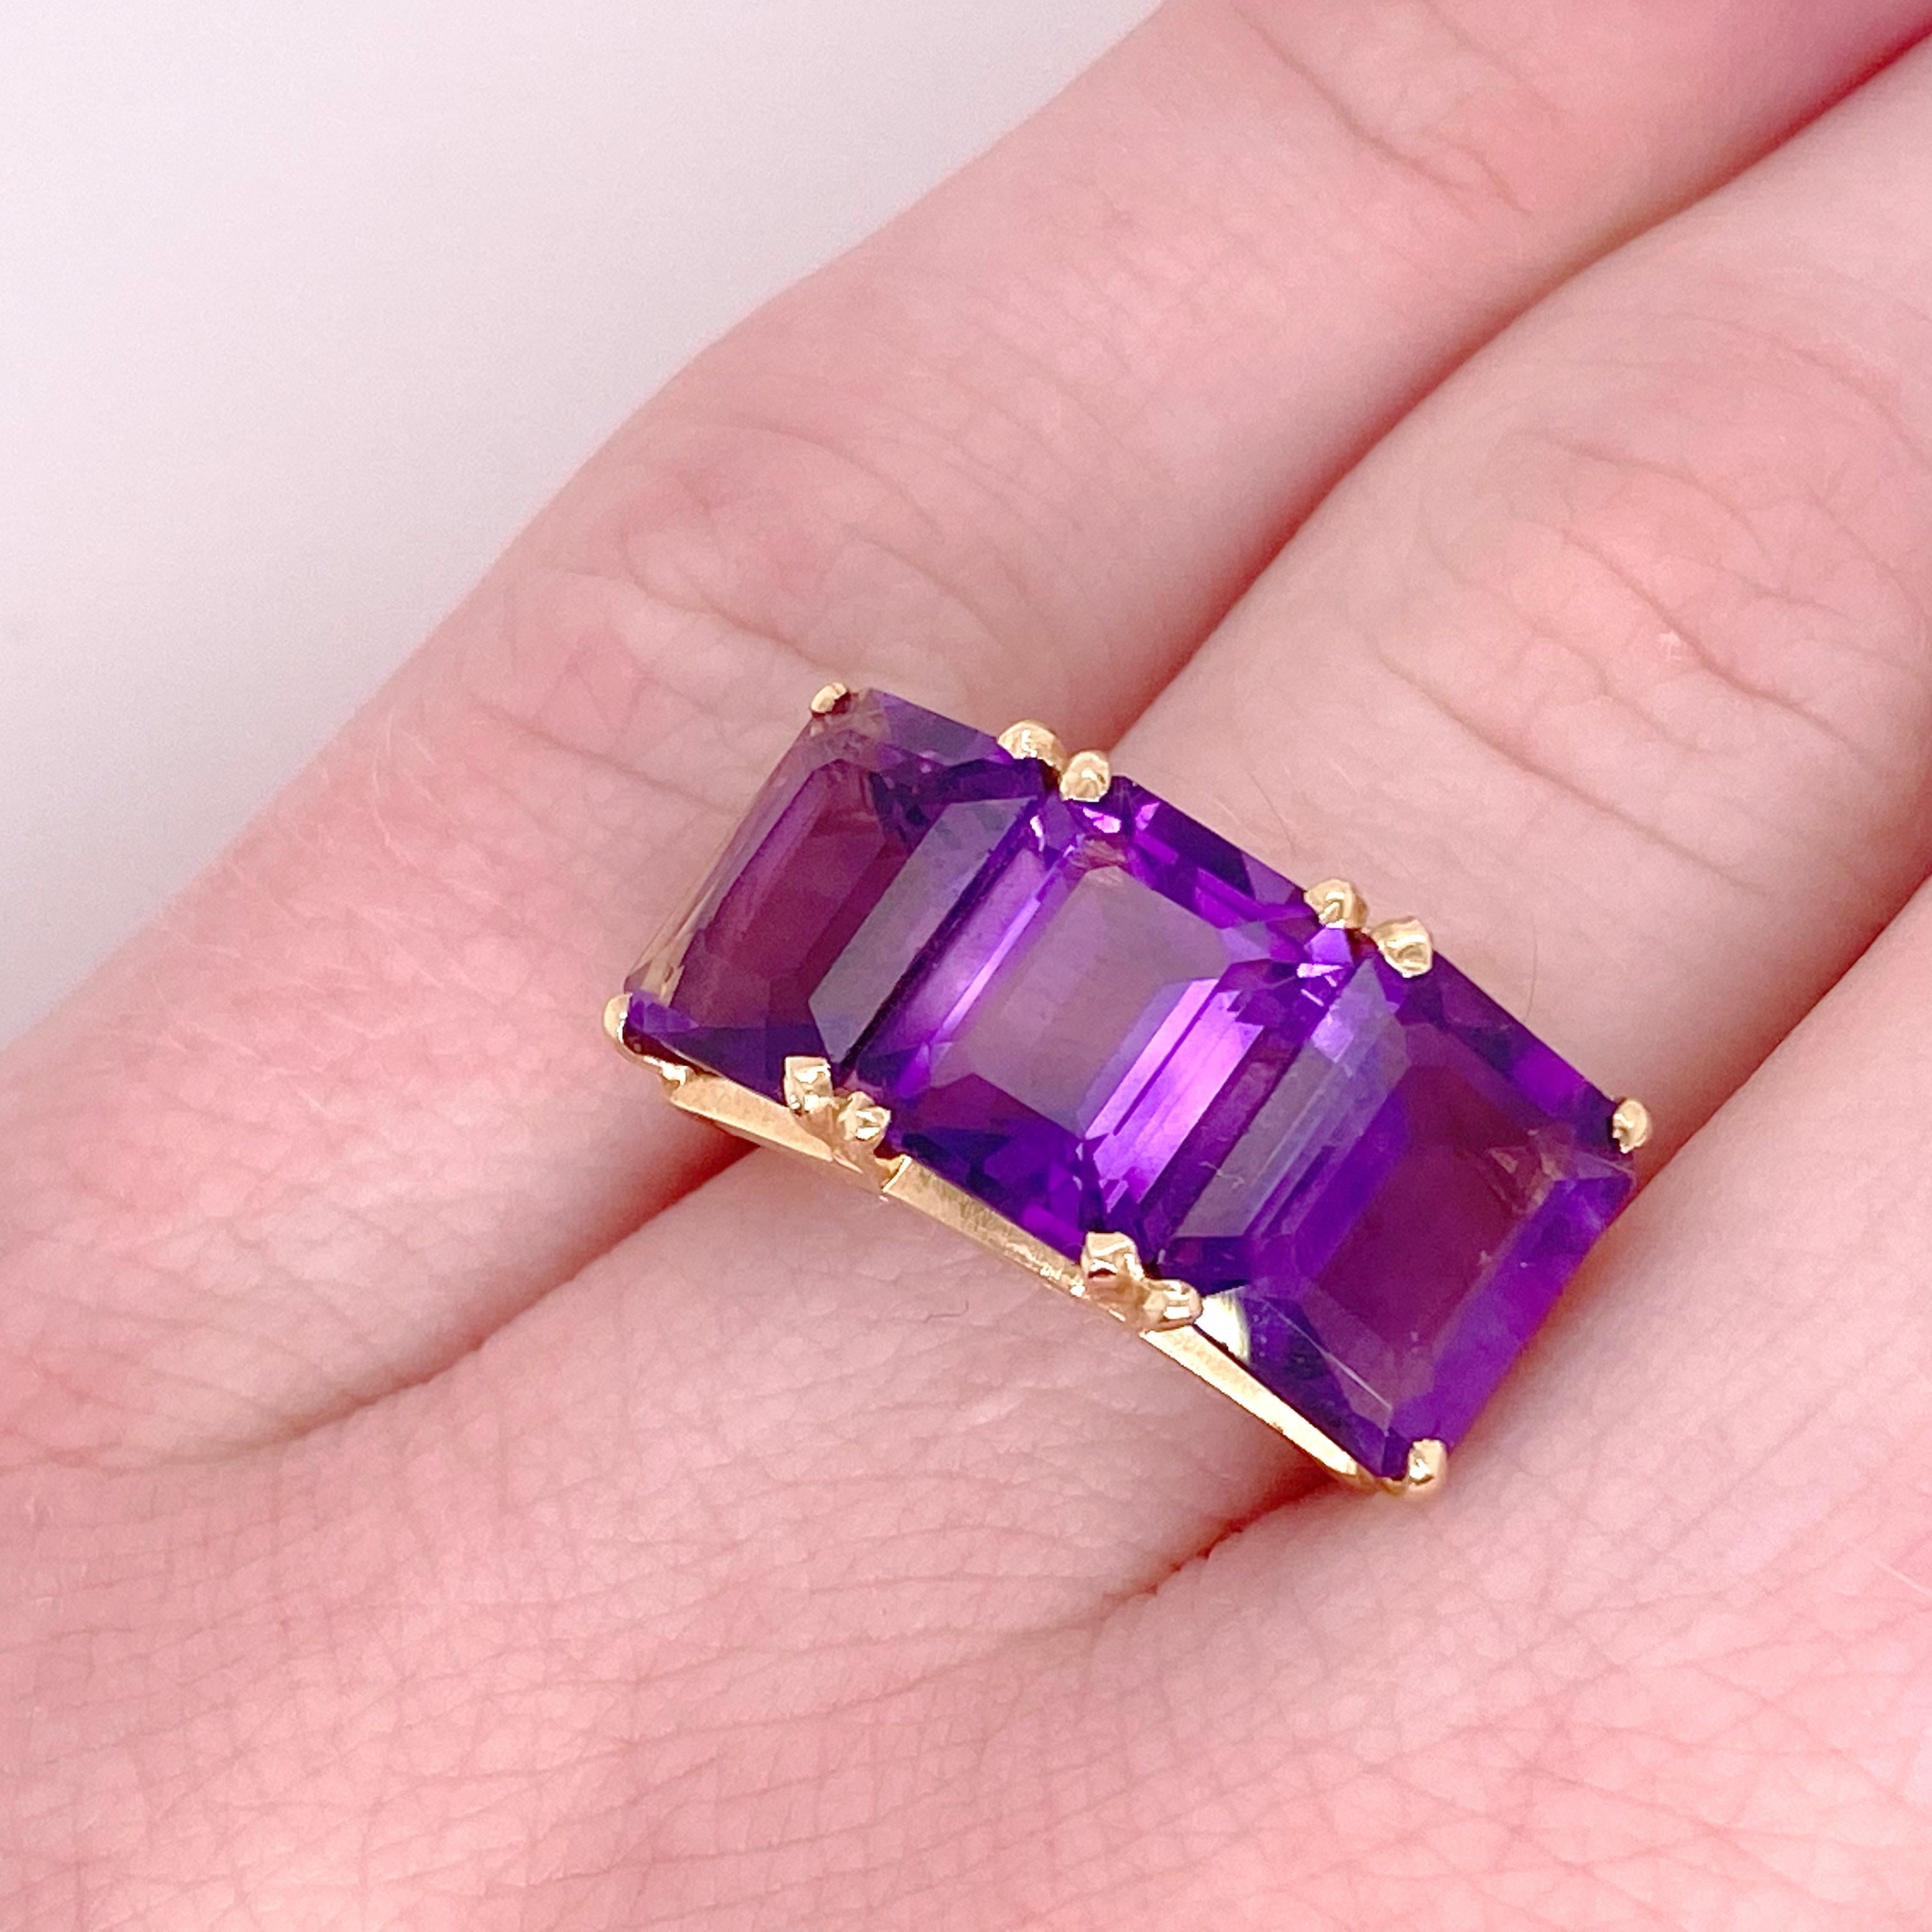 These three large amethysts are perfect and symmetrical in their emerald cut design. Together the three amethysts weigh over 7 carats. This ring is both a statement piece and it is incredibly comfortable to wear. The cathedral style undergallery